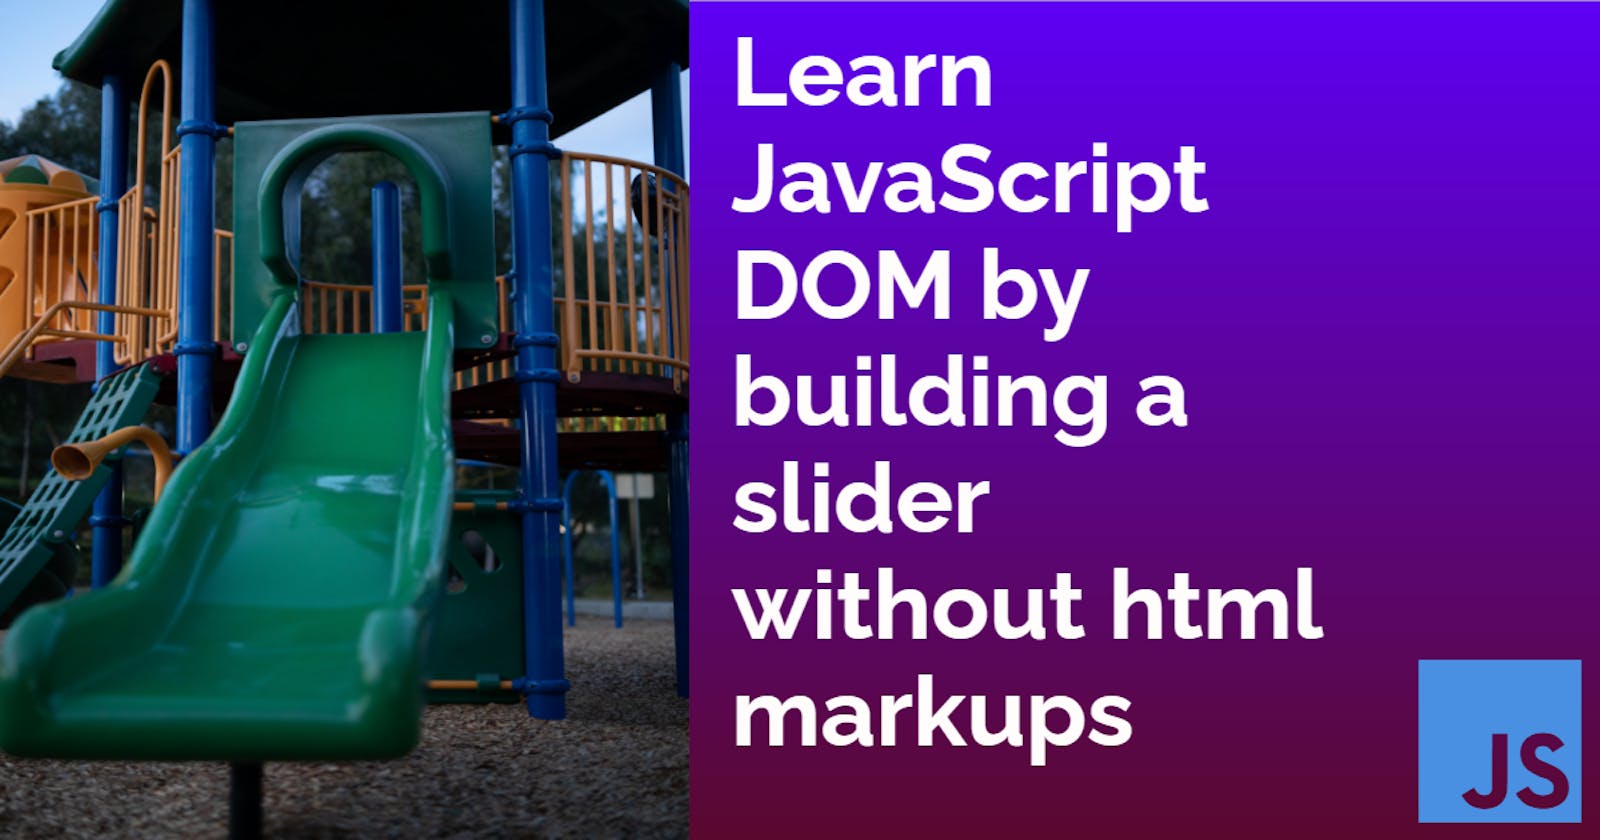 Learn JavaScript DOM by building a slider without html markups